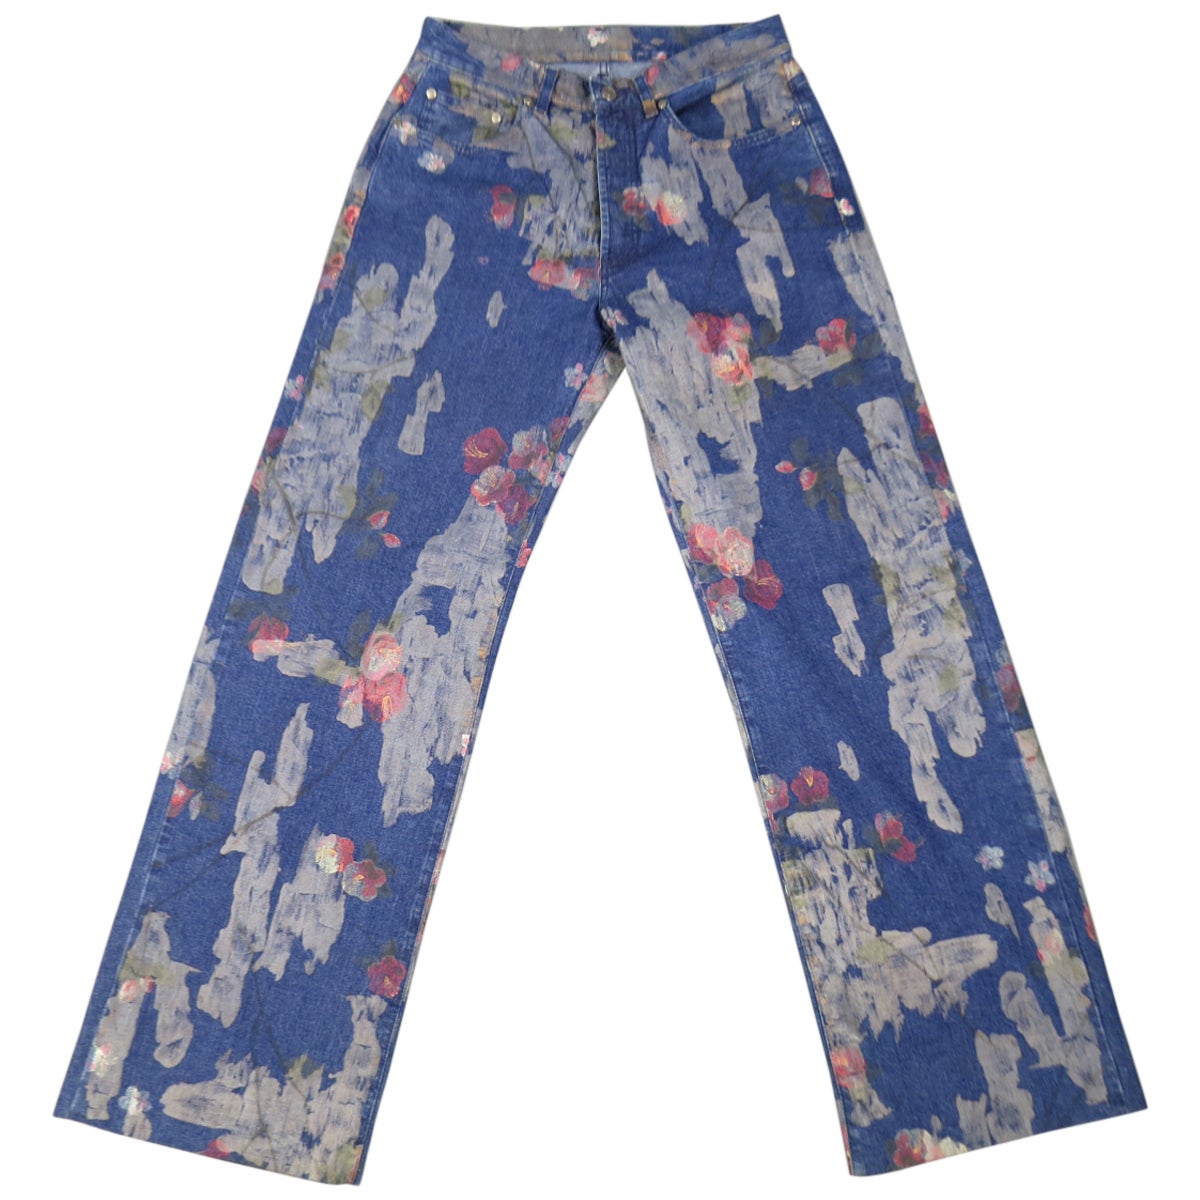 Gucci Floral Jeans - 5 For Sale on 1stDibs | gucci floral jeans mens, gucci  floral painted jeans, floral jeans mens